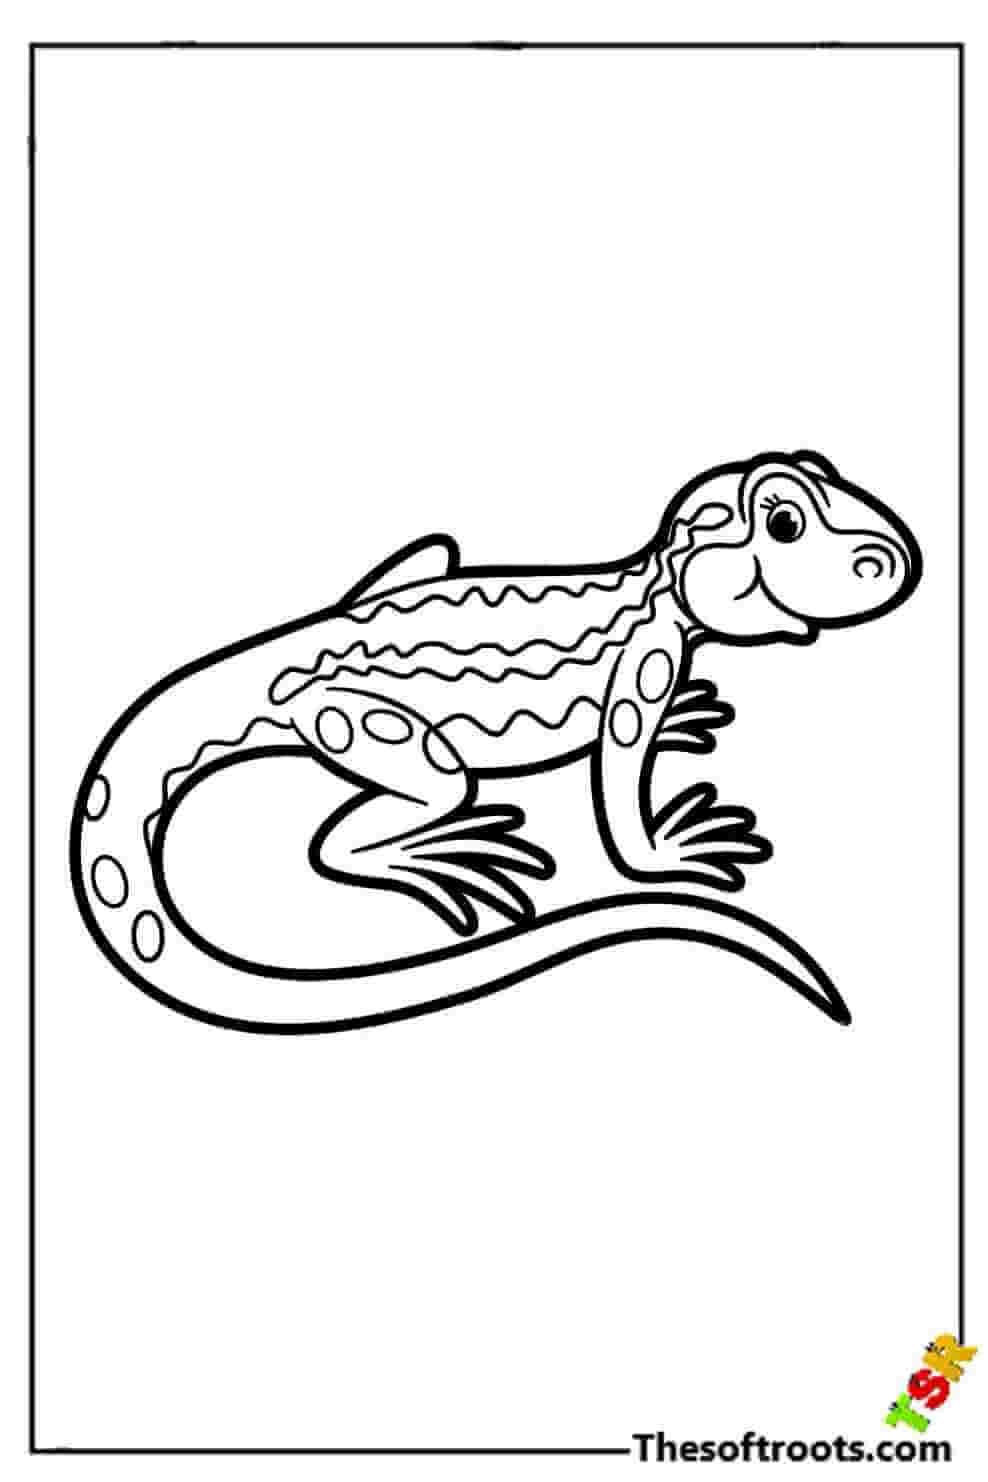 Cute lizard coloring pages